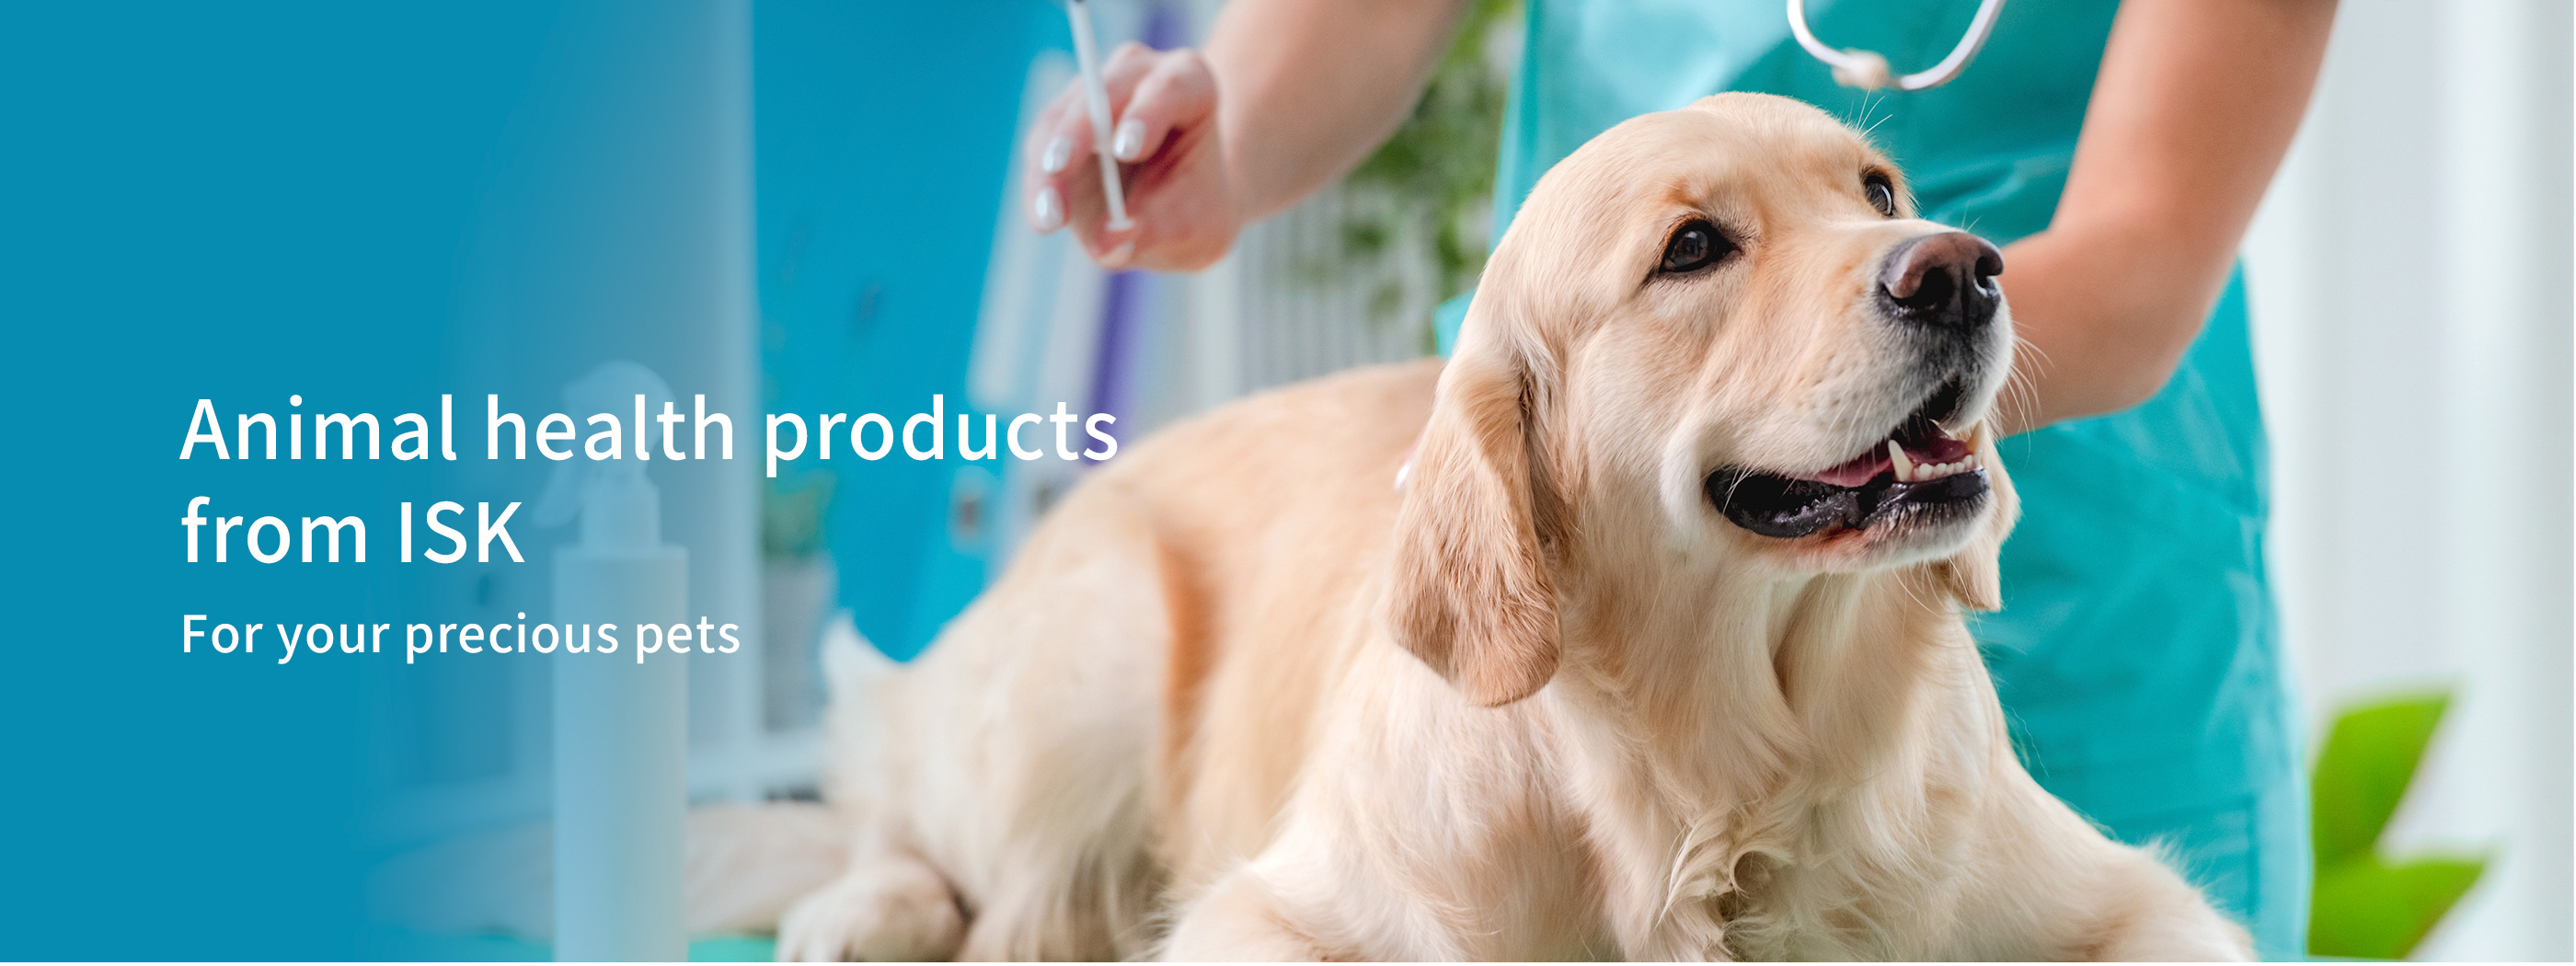 Animal health products from ISK For your precious pets